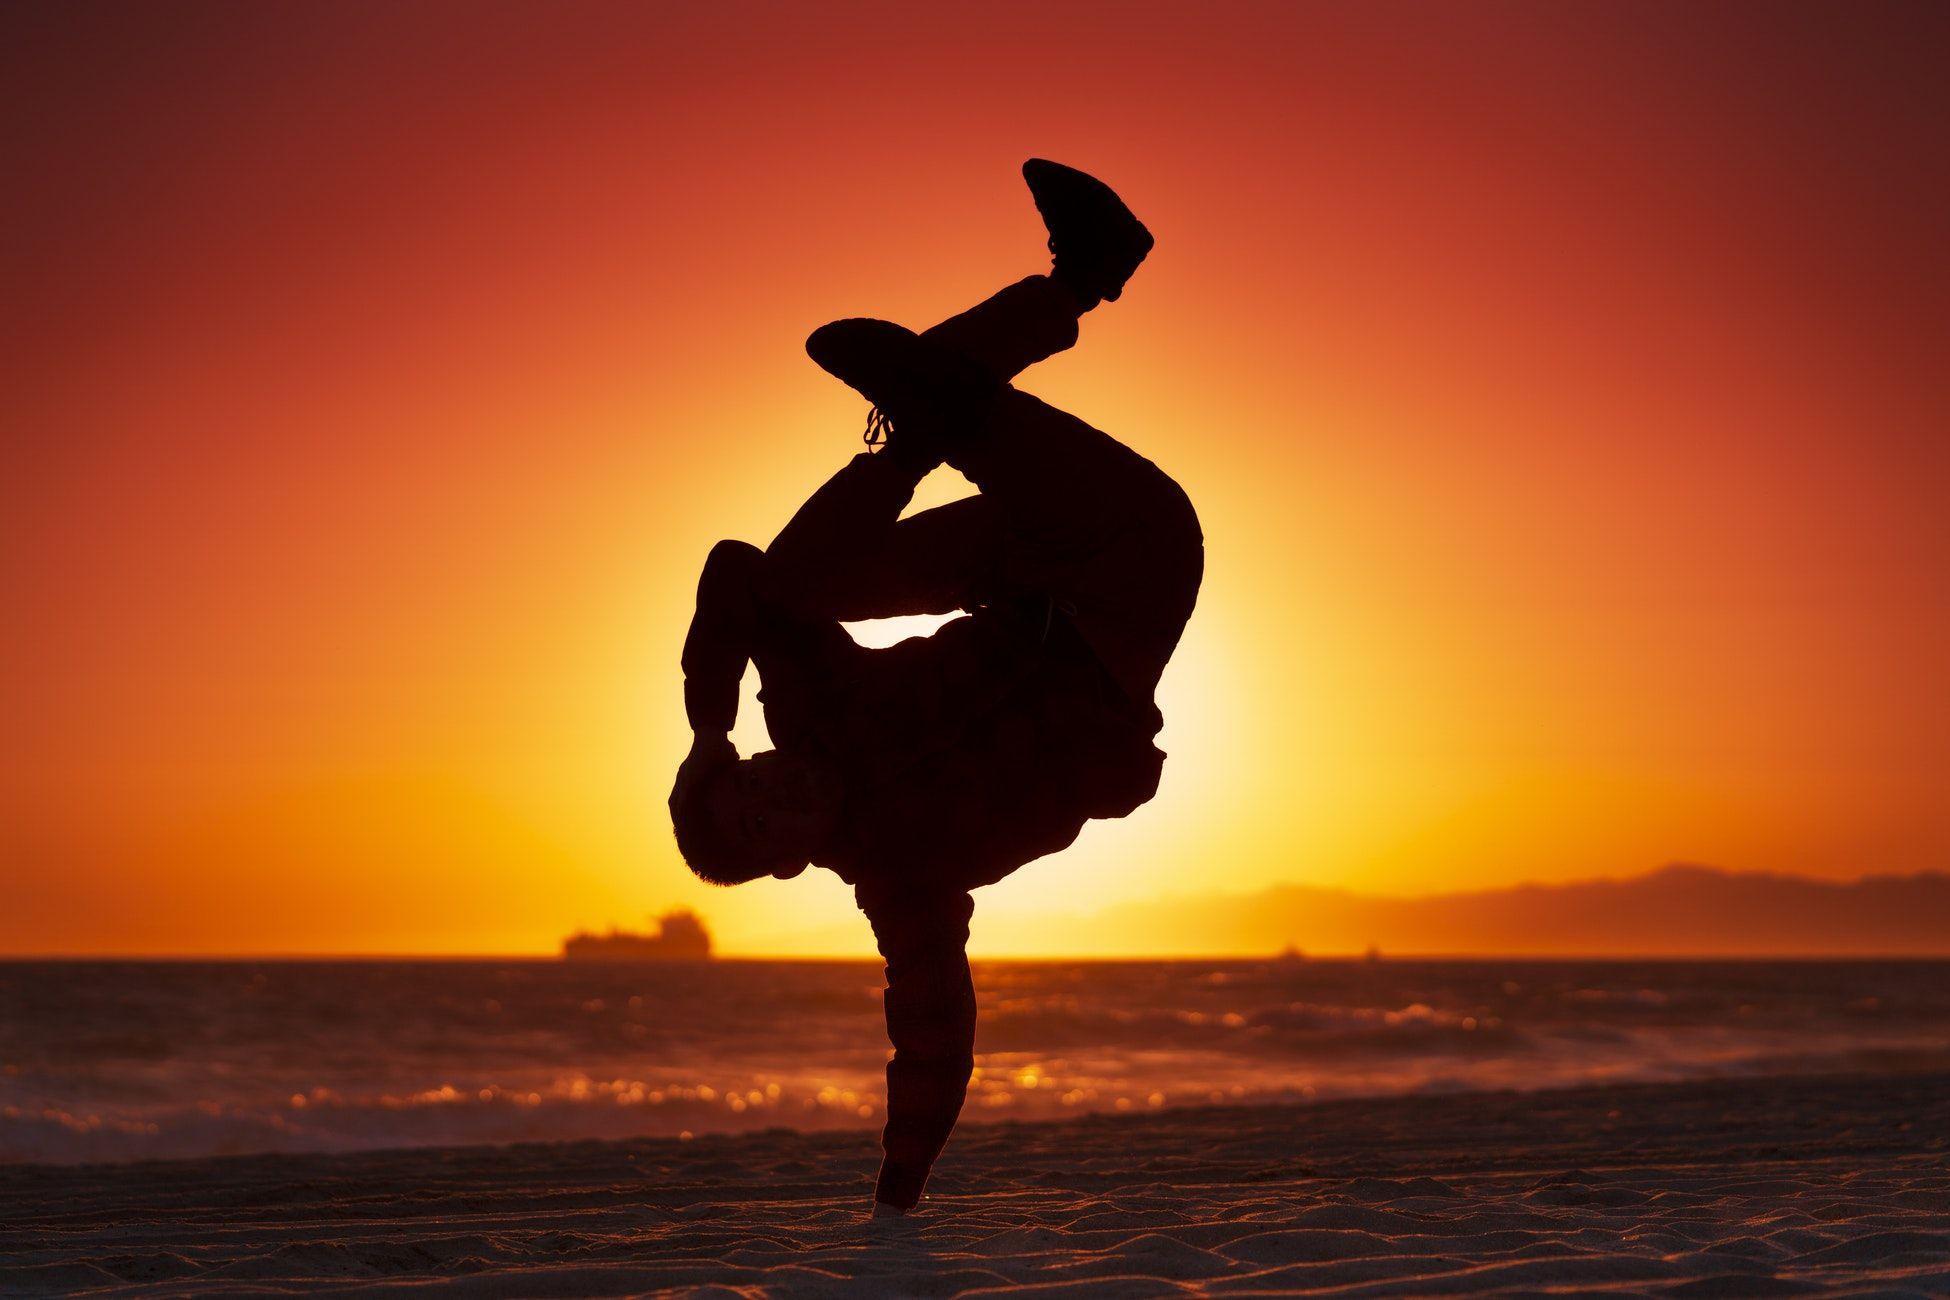 Breakdance Pictures  Download Free Images on Unsplash